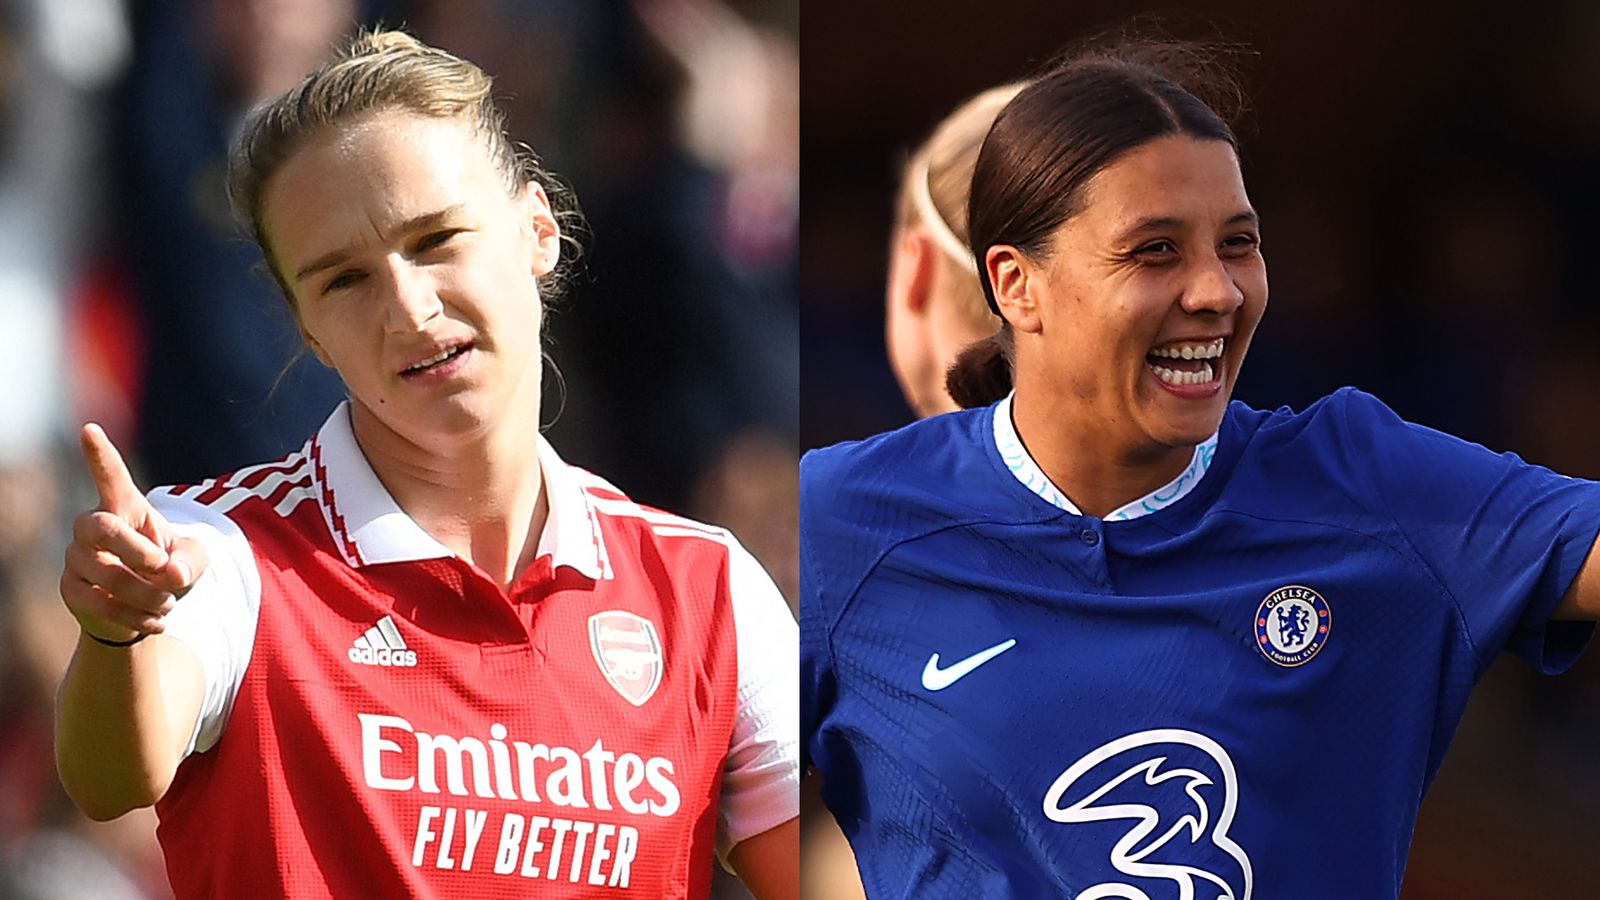 Women’s Champions League: Are Chelsea and Arsenal ready to challenge on European stage and topple Lyon?